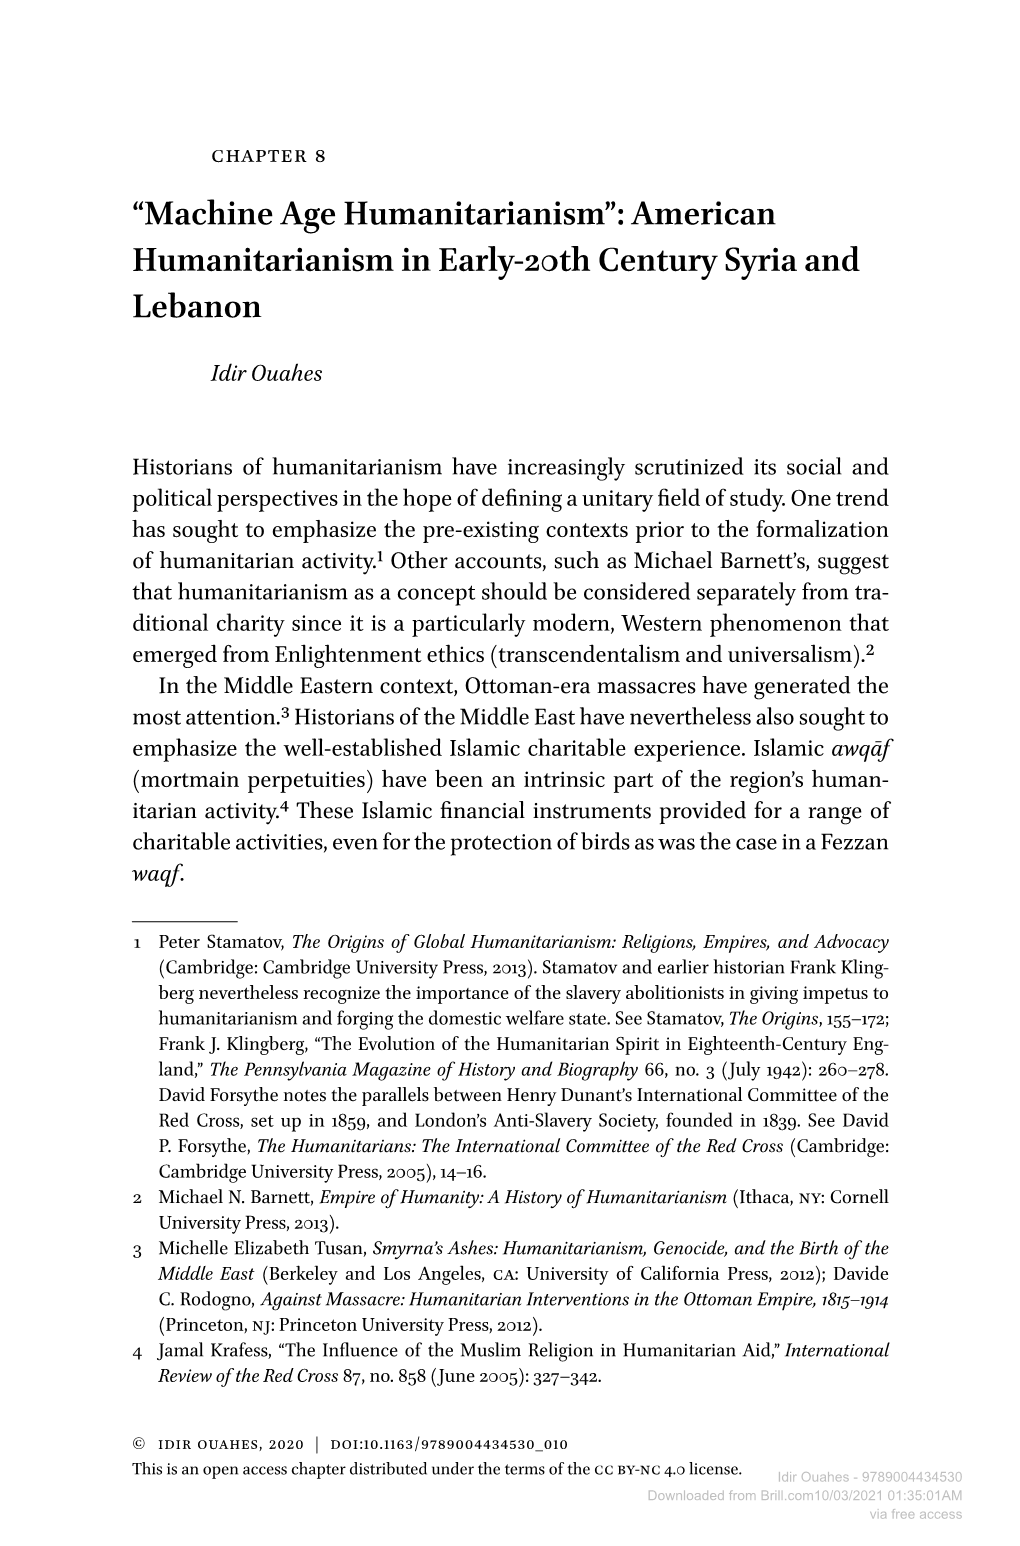 Machine Age Humanitarianism”: American Humanitarianism in Early-20Th Century Syria and Lebanon